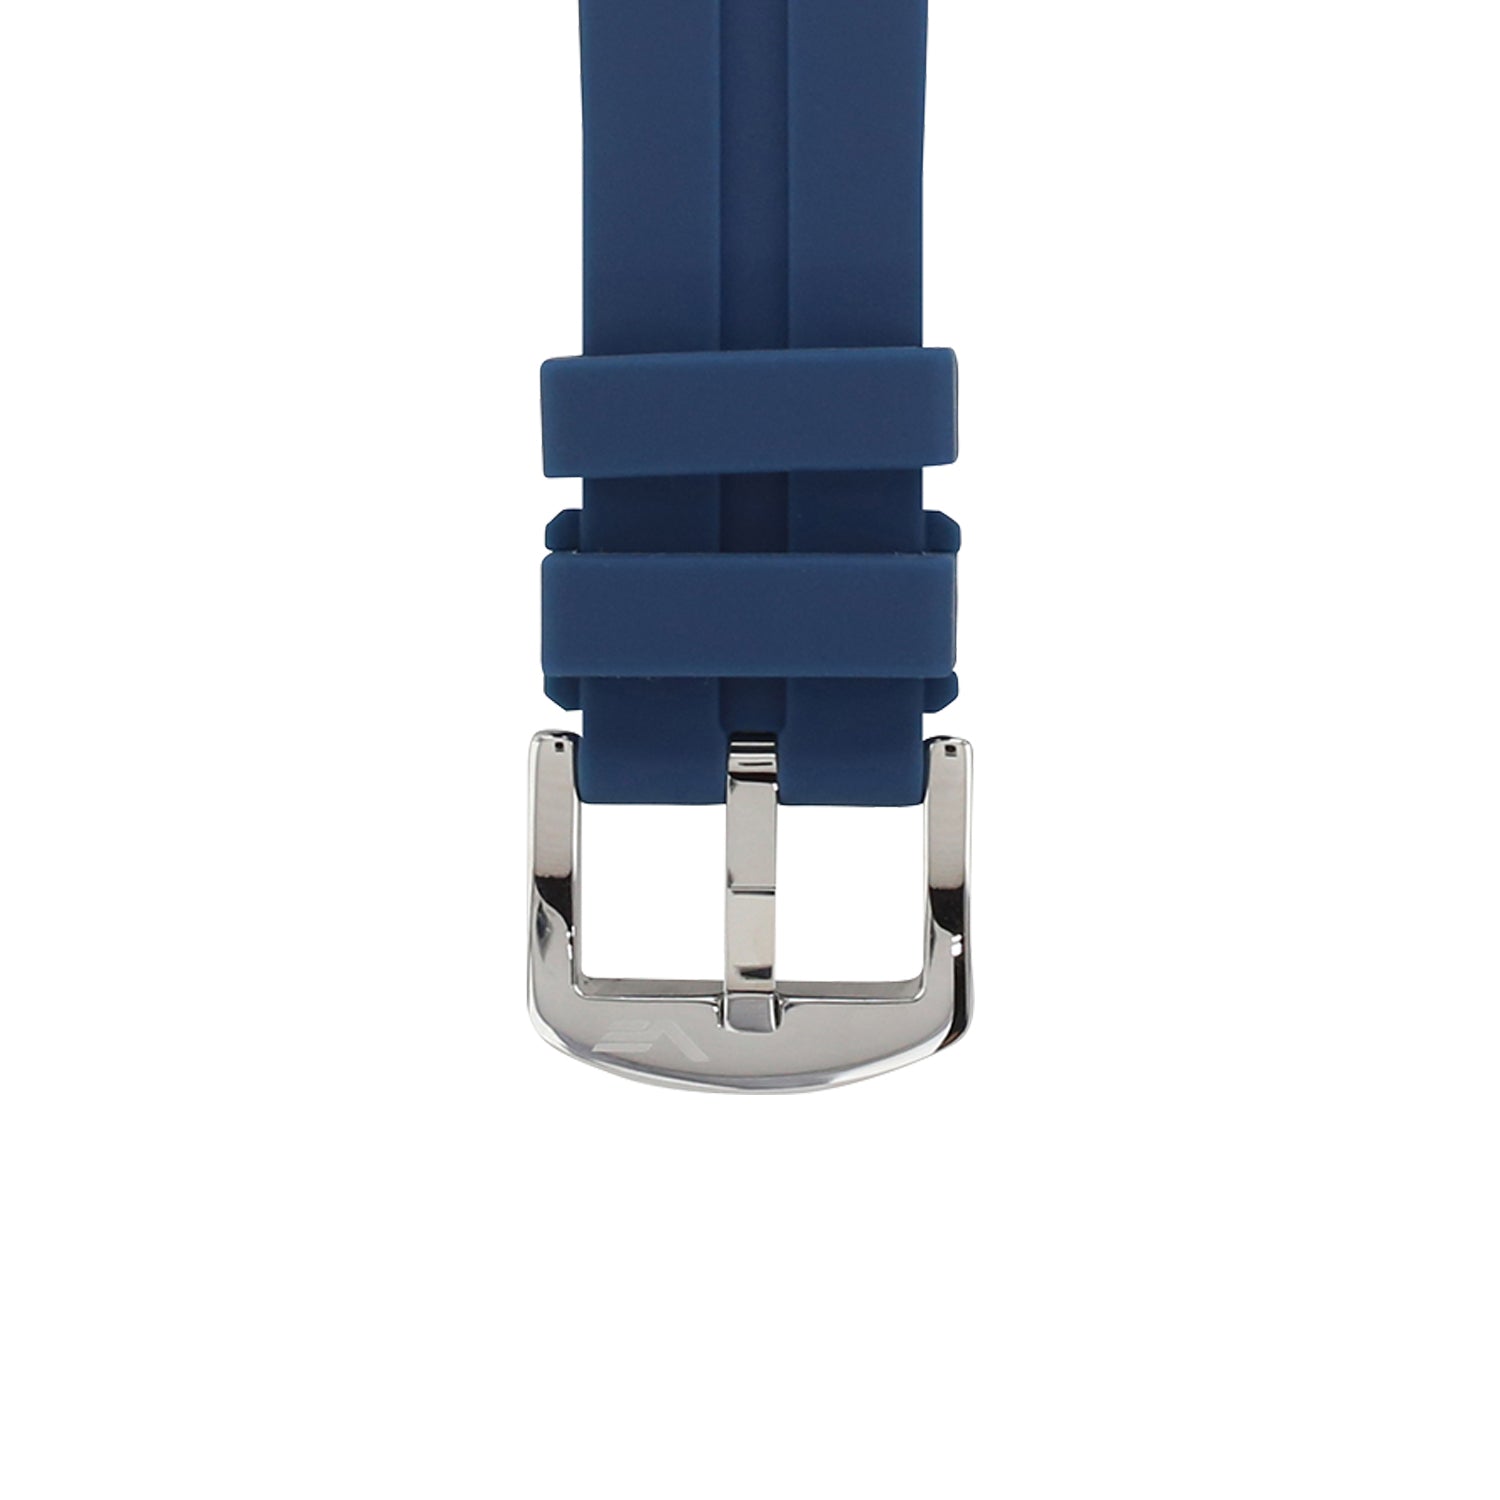 EXPEDITION N1 BLUE SILICONE STRAP 22mm - POLISHED BUCKLE